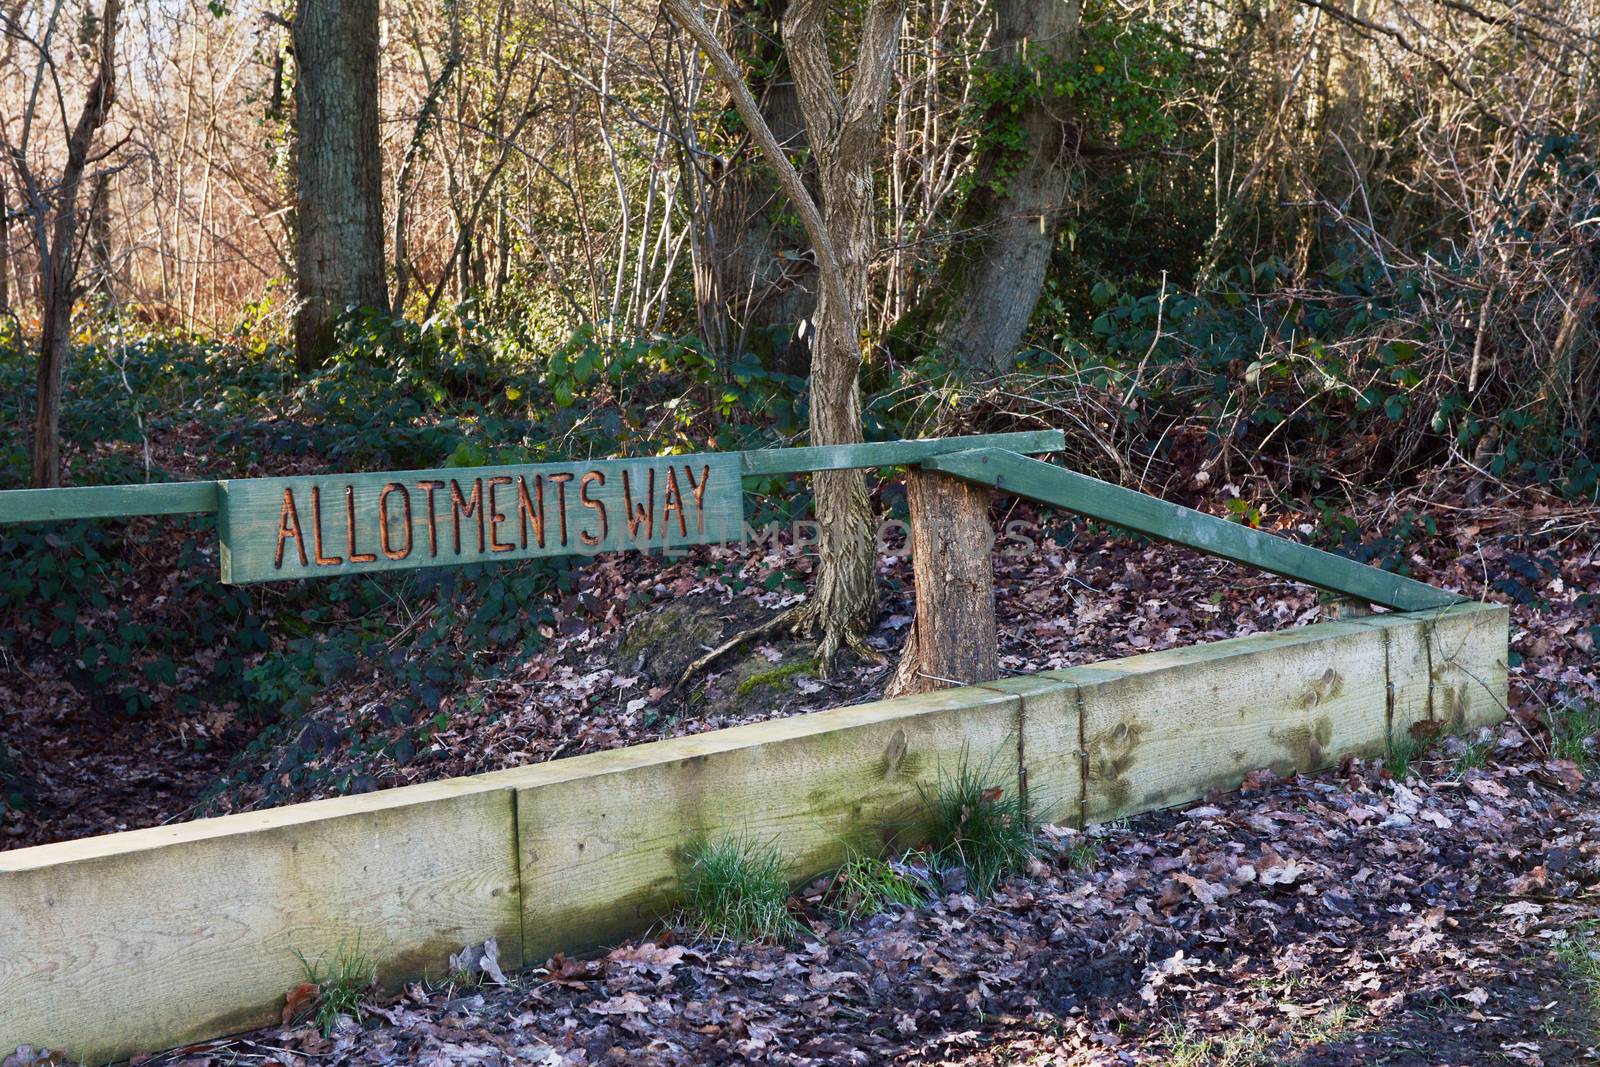 Rustic, carved wooden sign for Allotments Way in a wooded area in winter